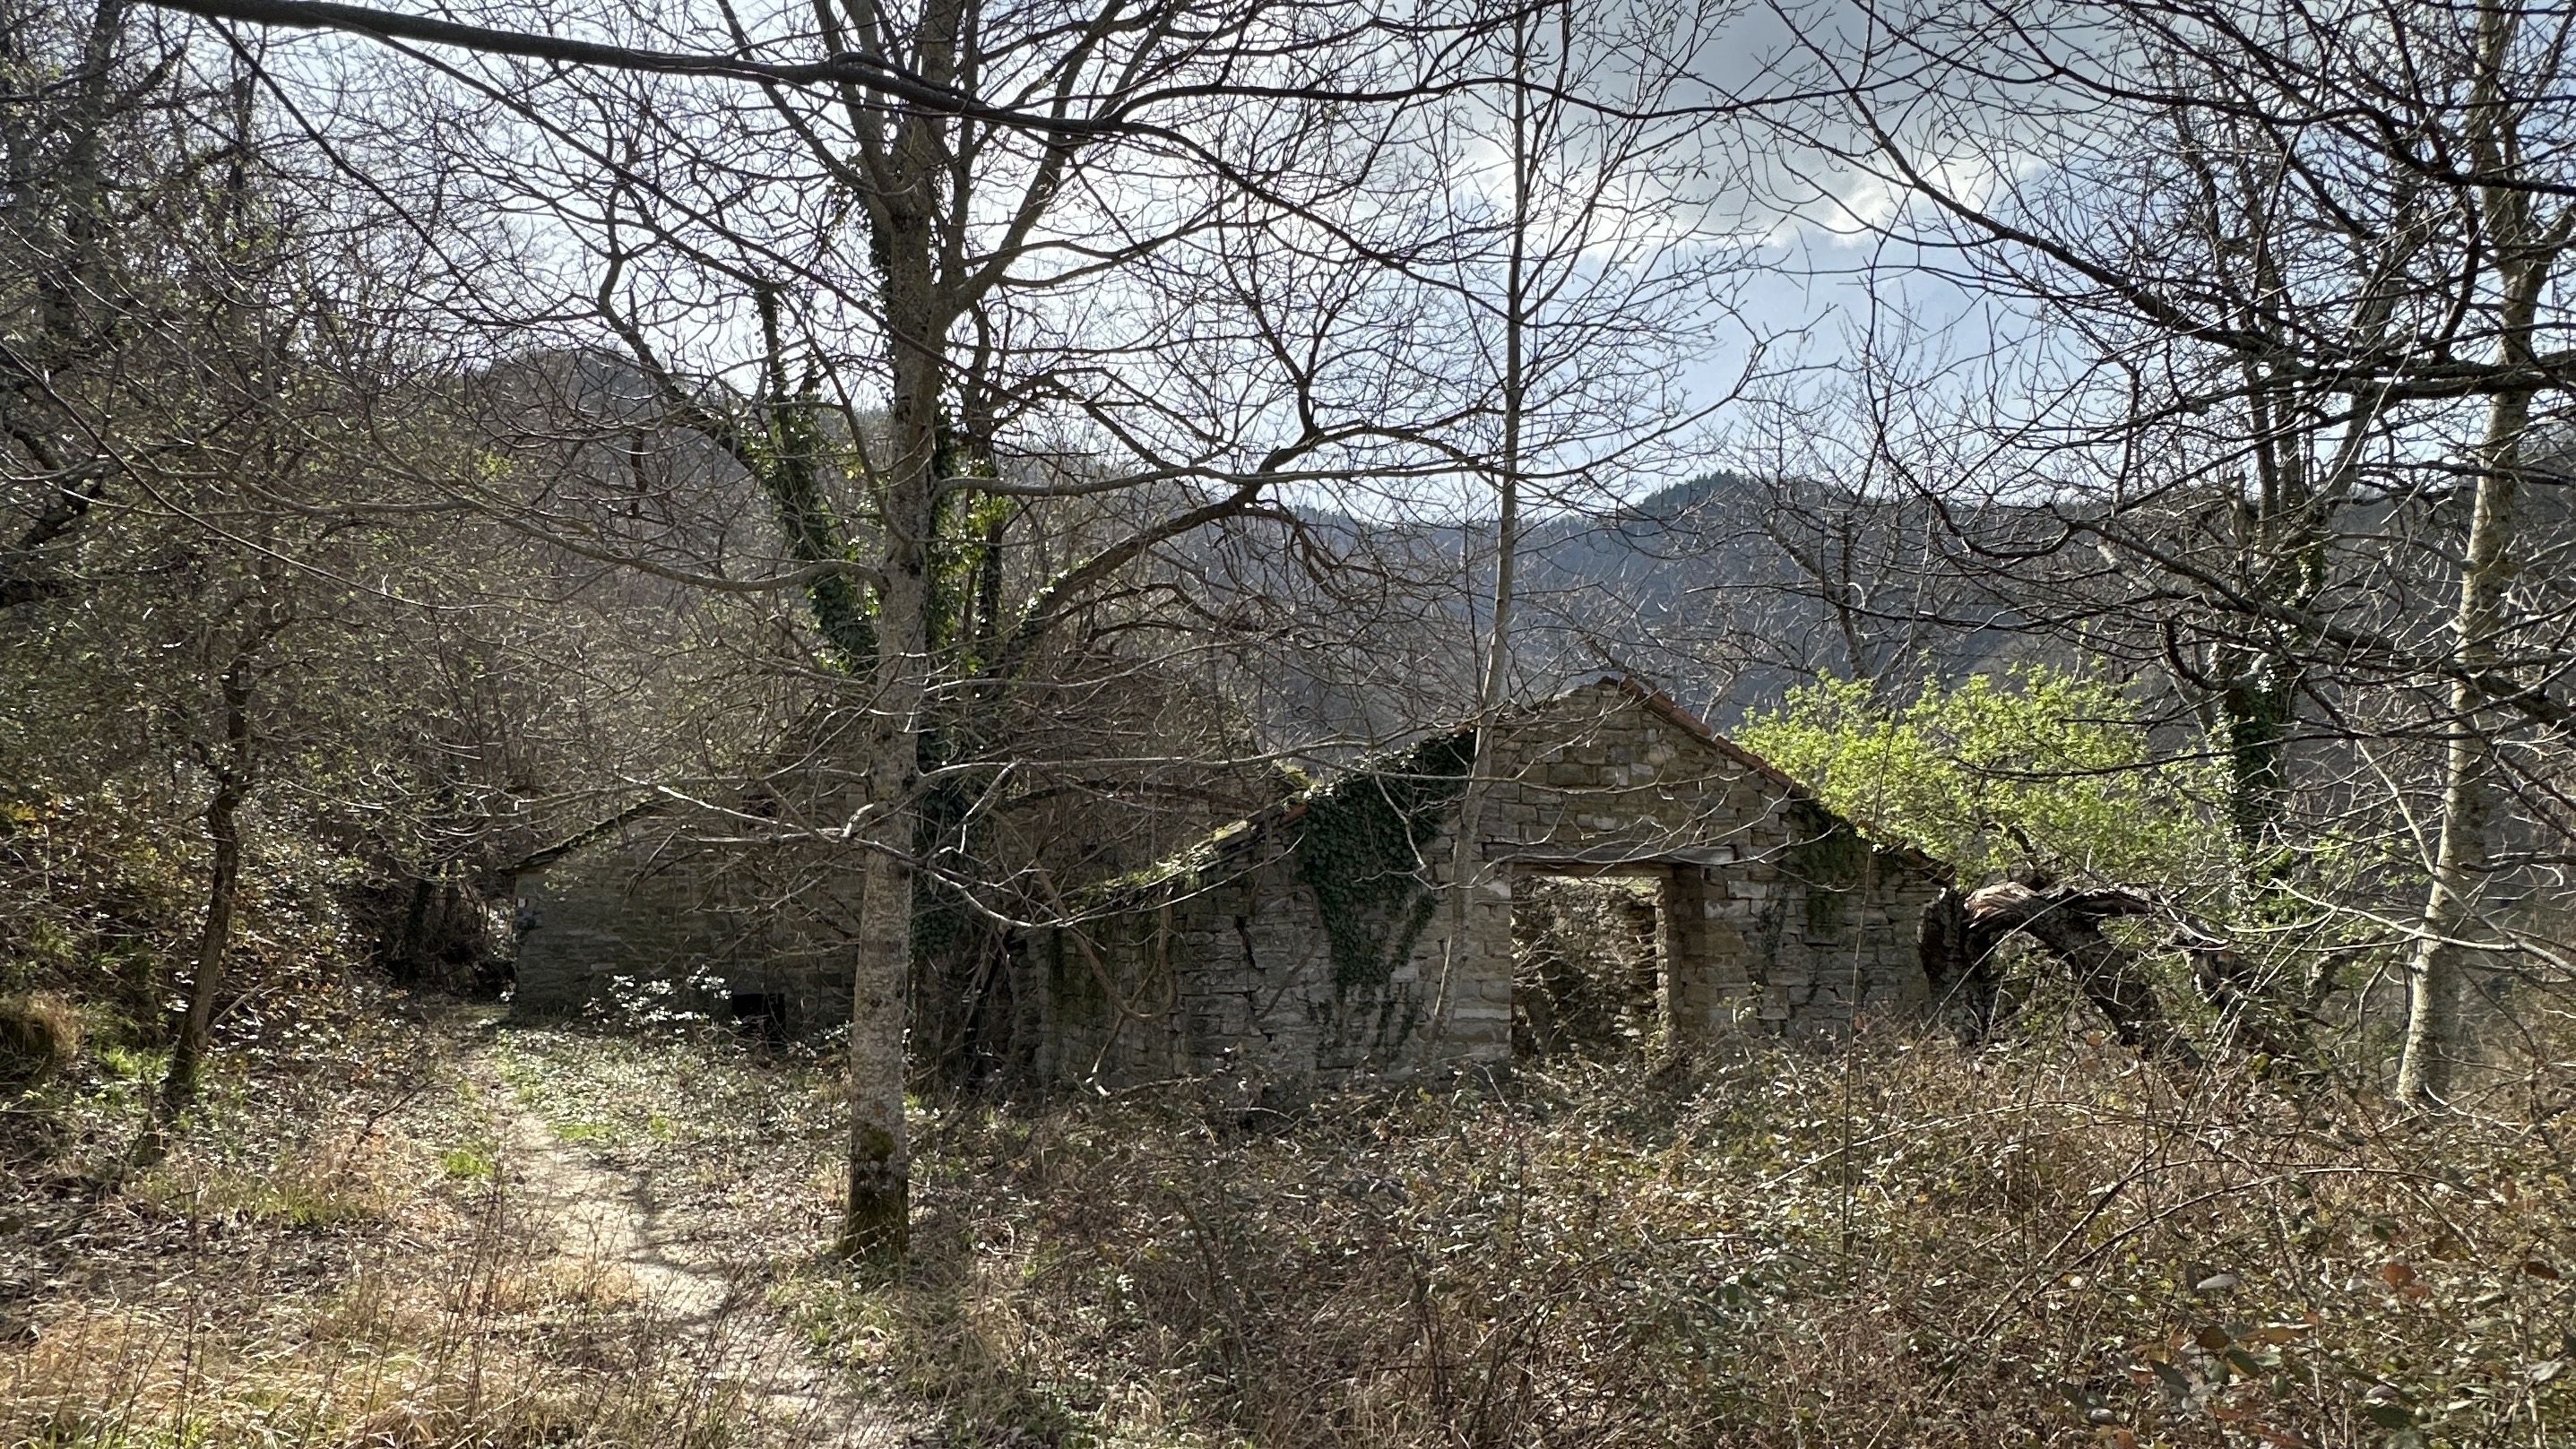 As is often the case in the Apennines, rural ruins are encountered on the trail.